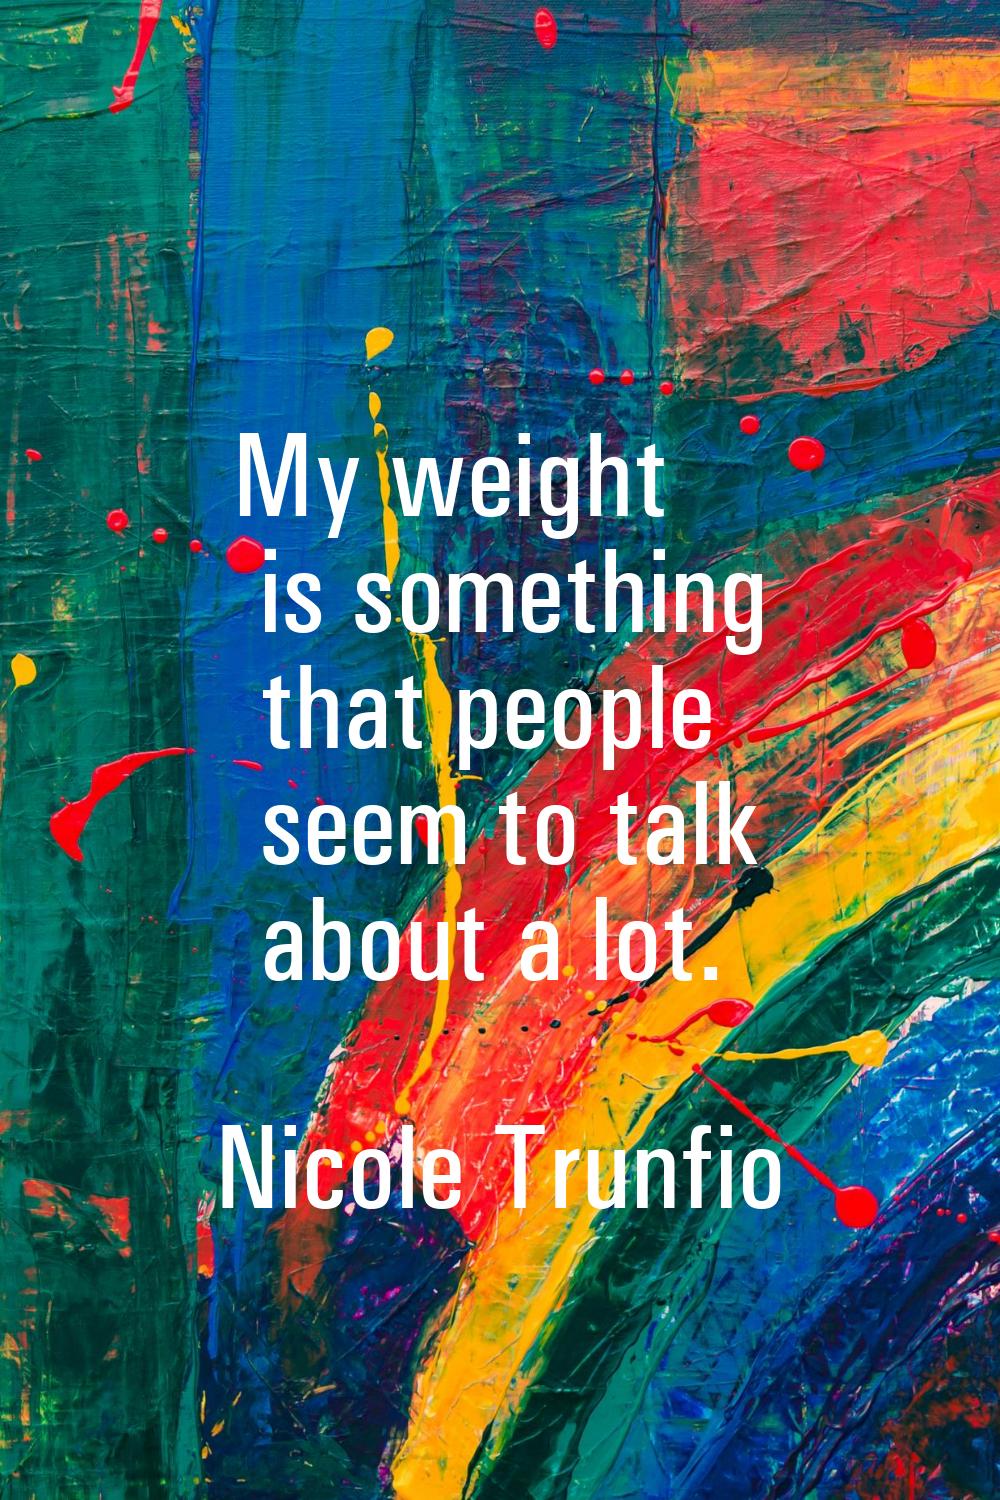 My weight is something that people seem to talk about a lot.